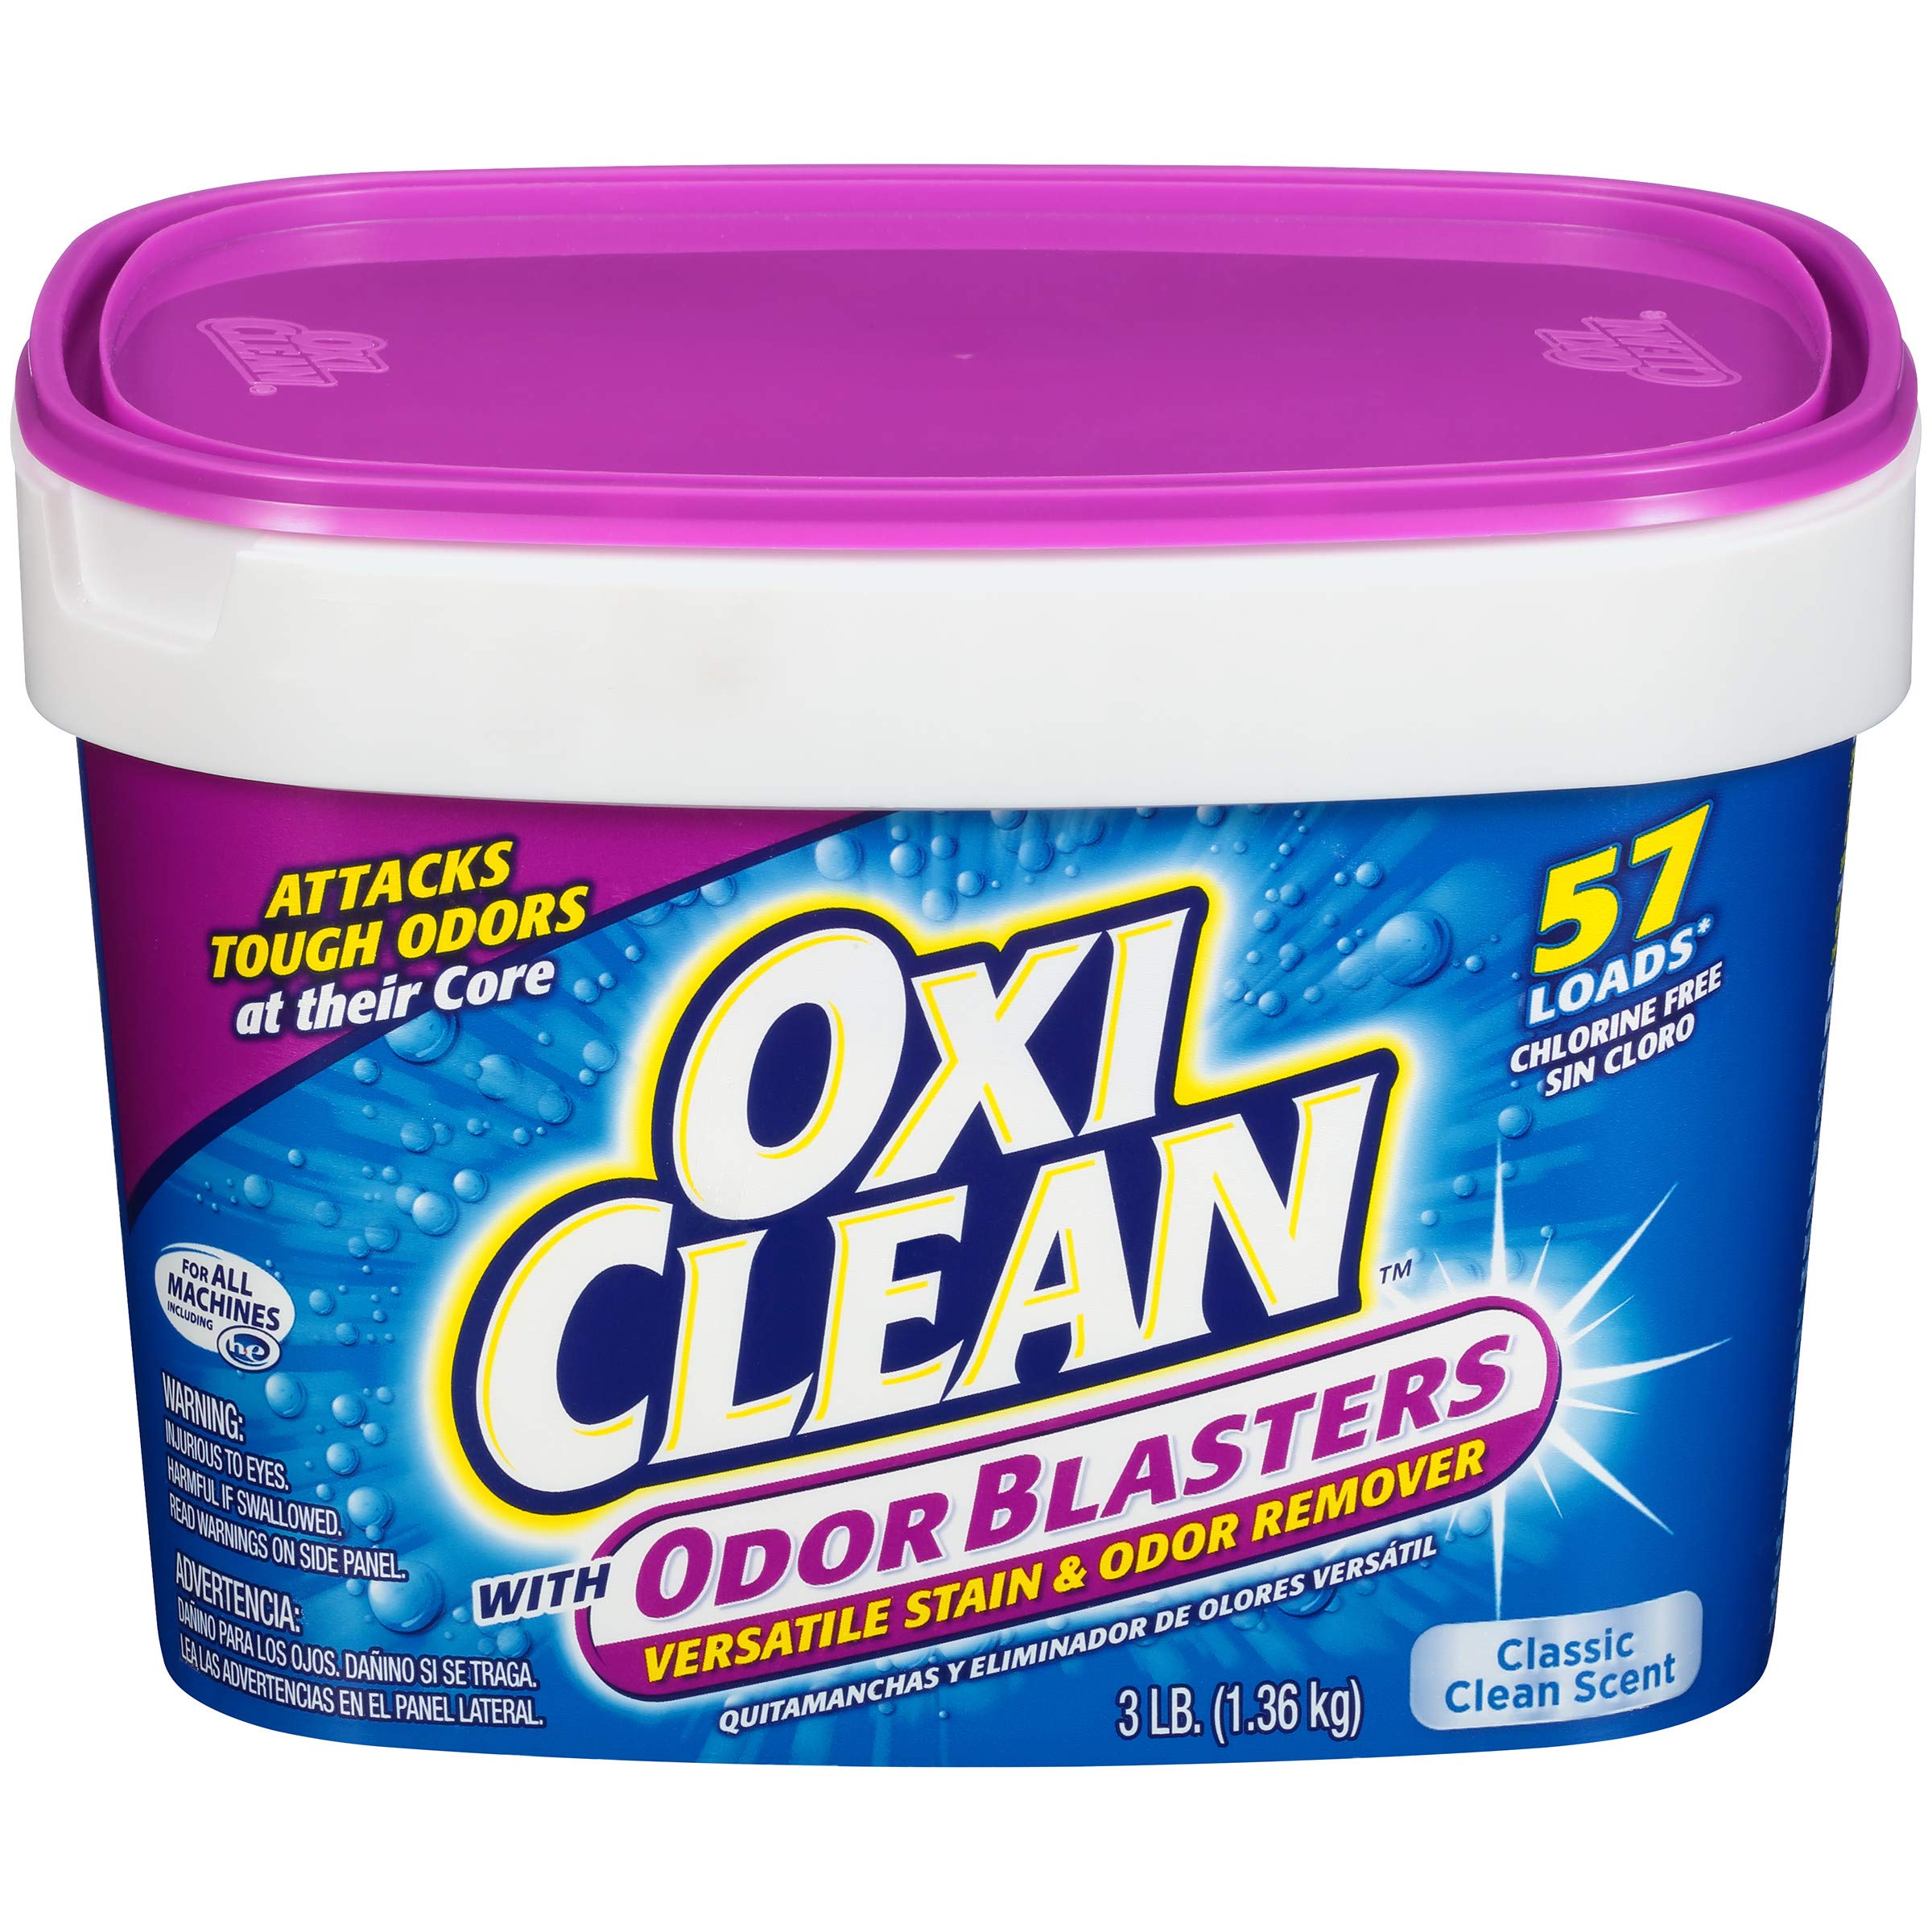 OxiClean with Odor Blasters Versatile Stain & Odor Remover 3 lb Tub - Pack of 2